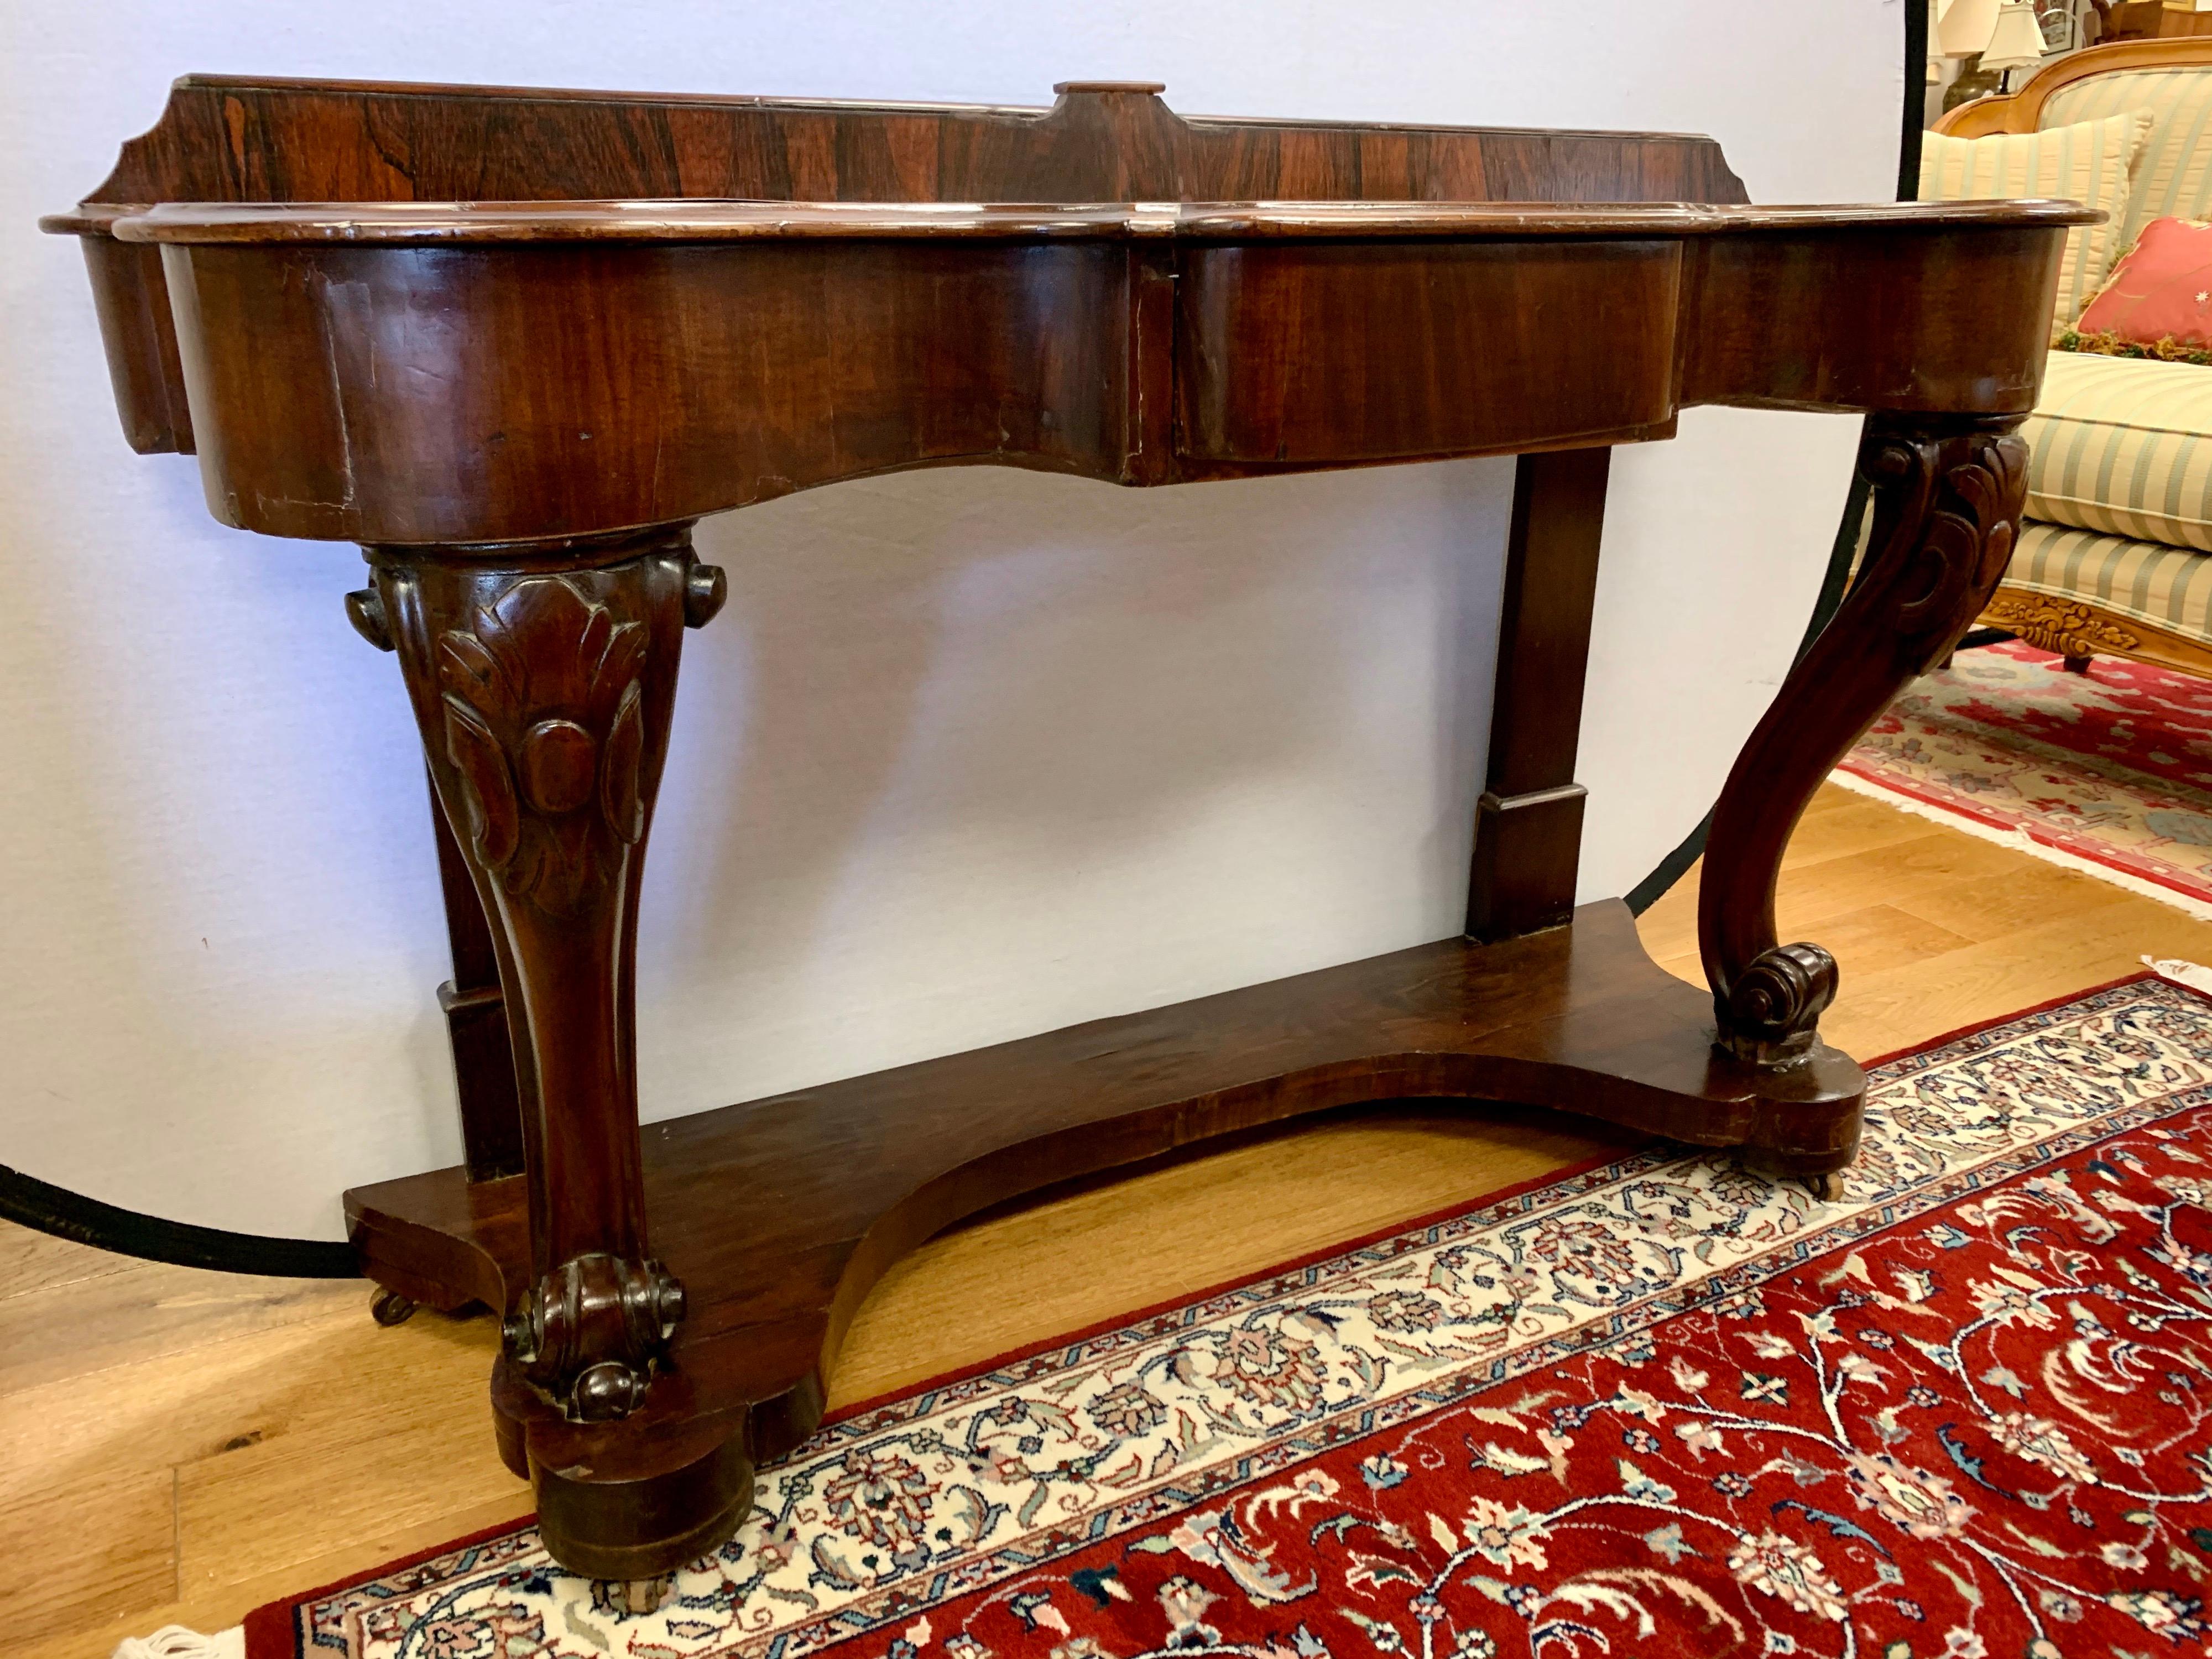 Elegant 19th century Empire console table with rear border which measures 33.5 from top to bottom, circa mid-19th century. Age appropriate wear. Features one center drawer and caster wheels for ease of movement. Features a beautiful aged patina.